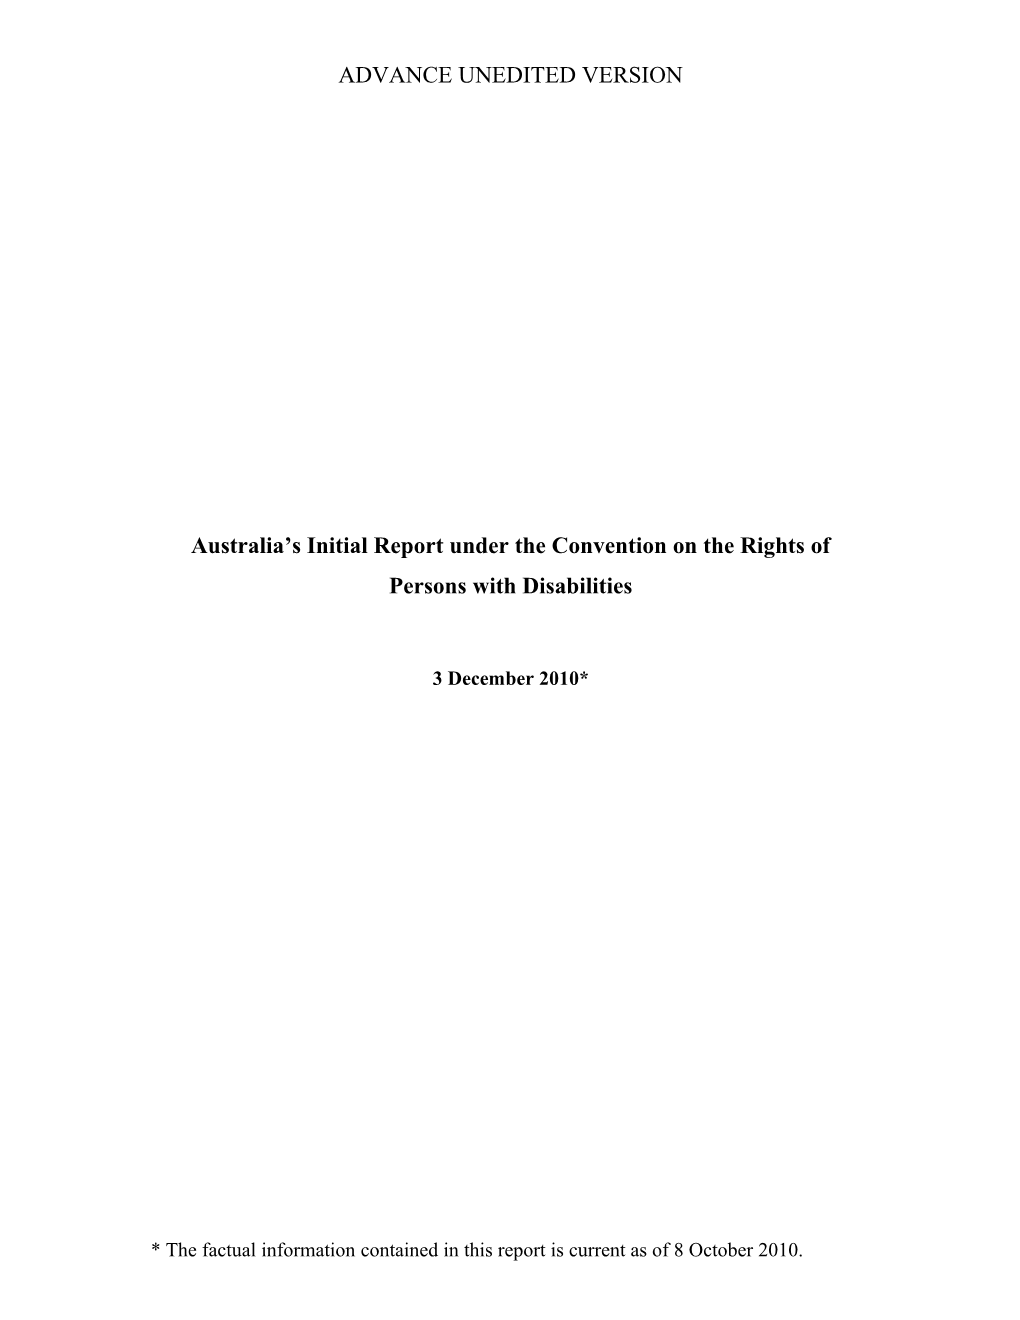 Australia S Initial Report Under the Convention on the Rights of Persons with Disabilities